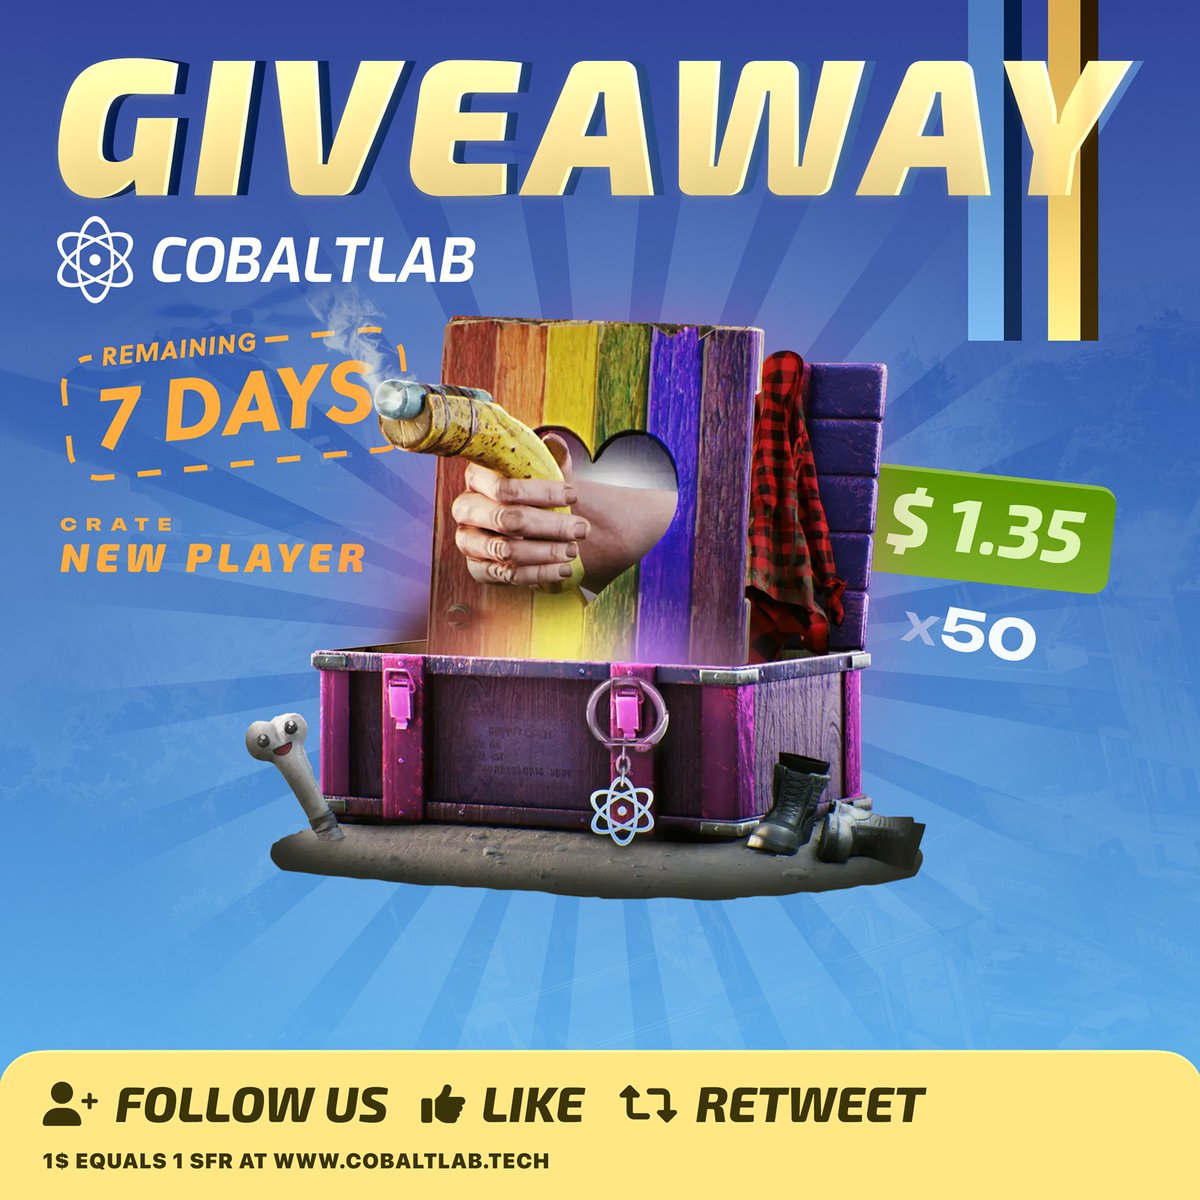 50 New Player Crates Giveaway! 🎁

To enter:

• Follow us @Cobaltlabrust 
• Like & Retweet

– 5 winners will be randomly selected in 7 days. Good luck! 🍀